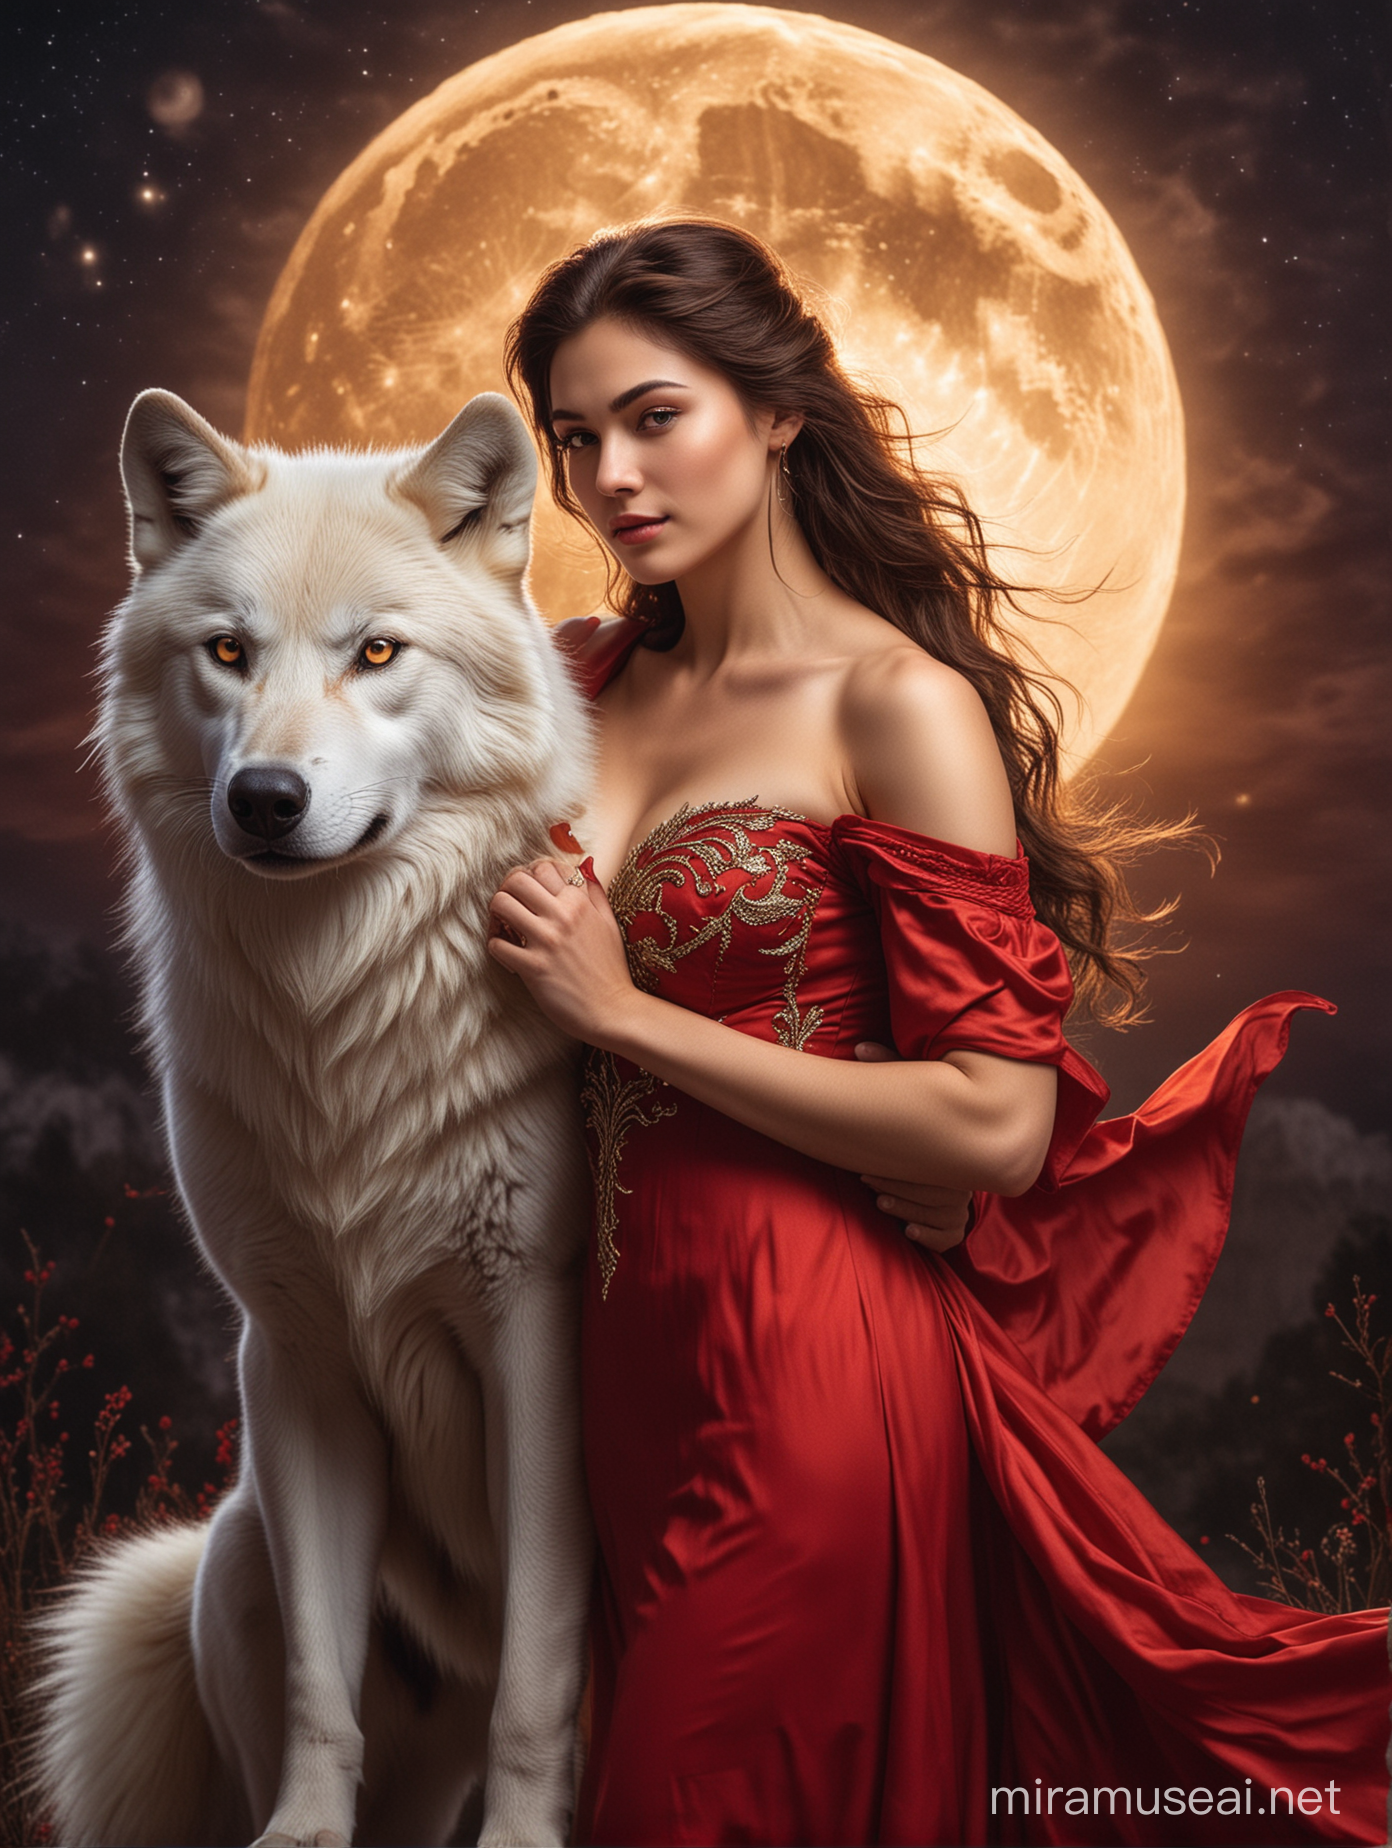 Romantic Couple with Glowing Wolf Under Moonlight